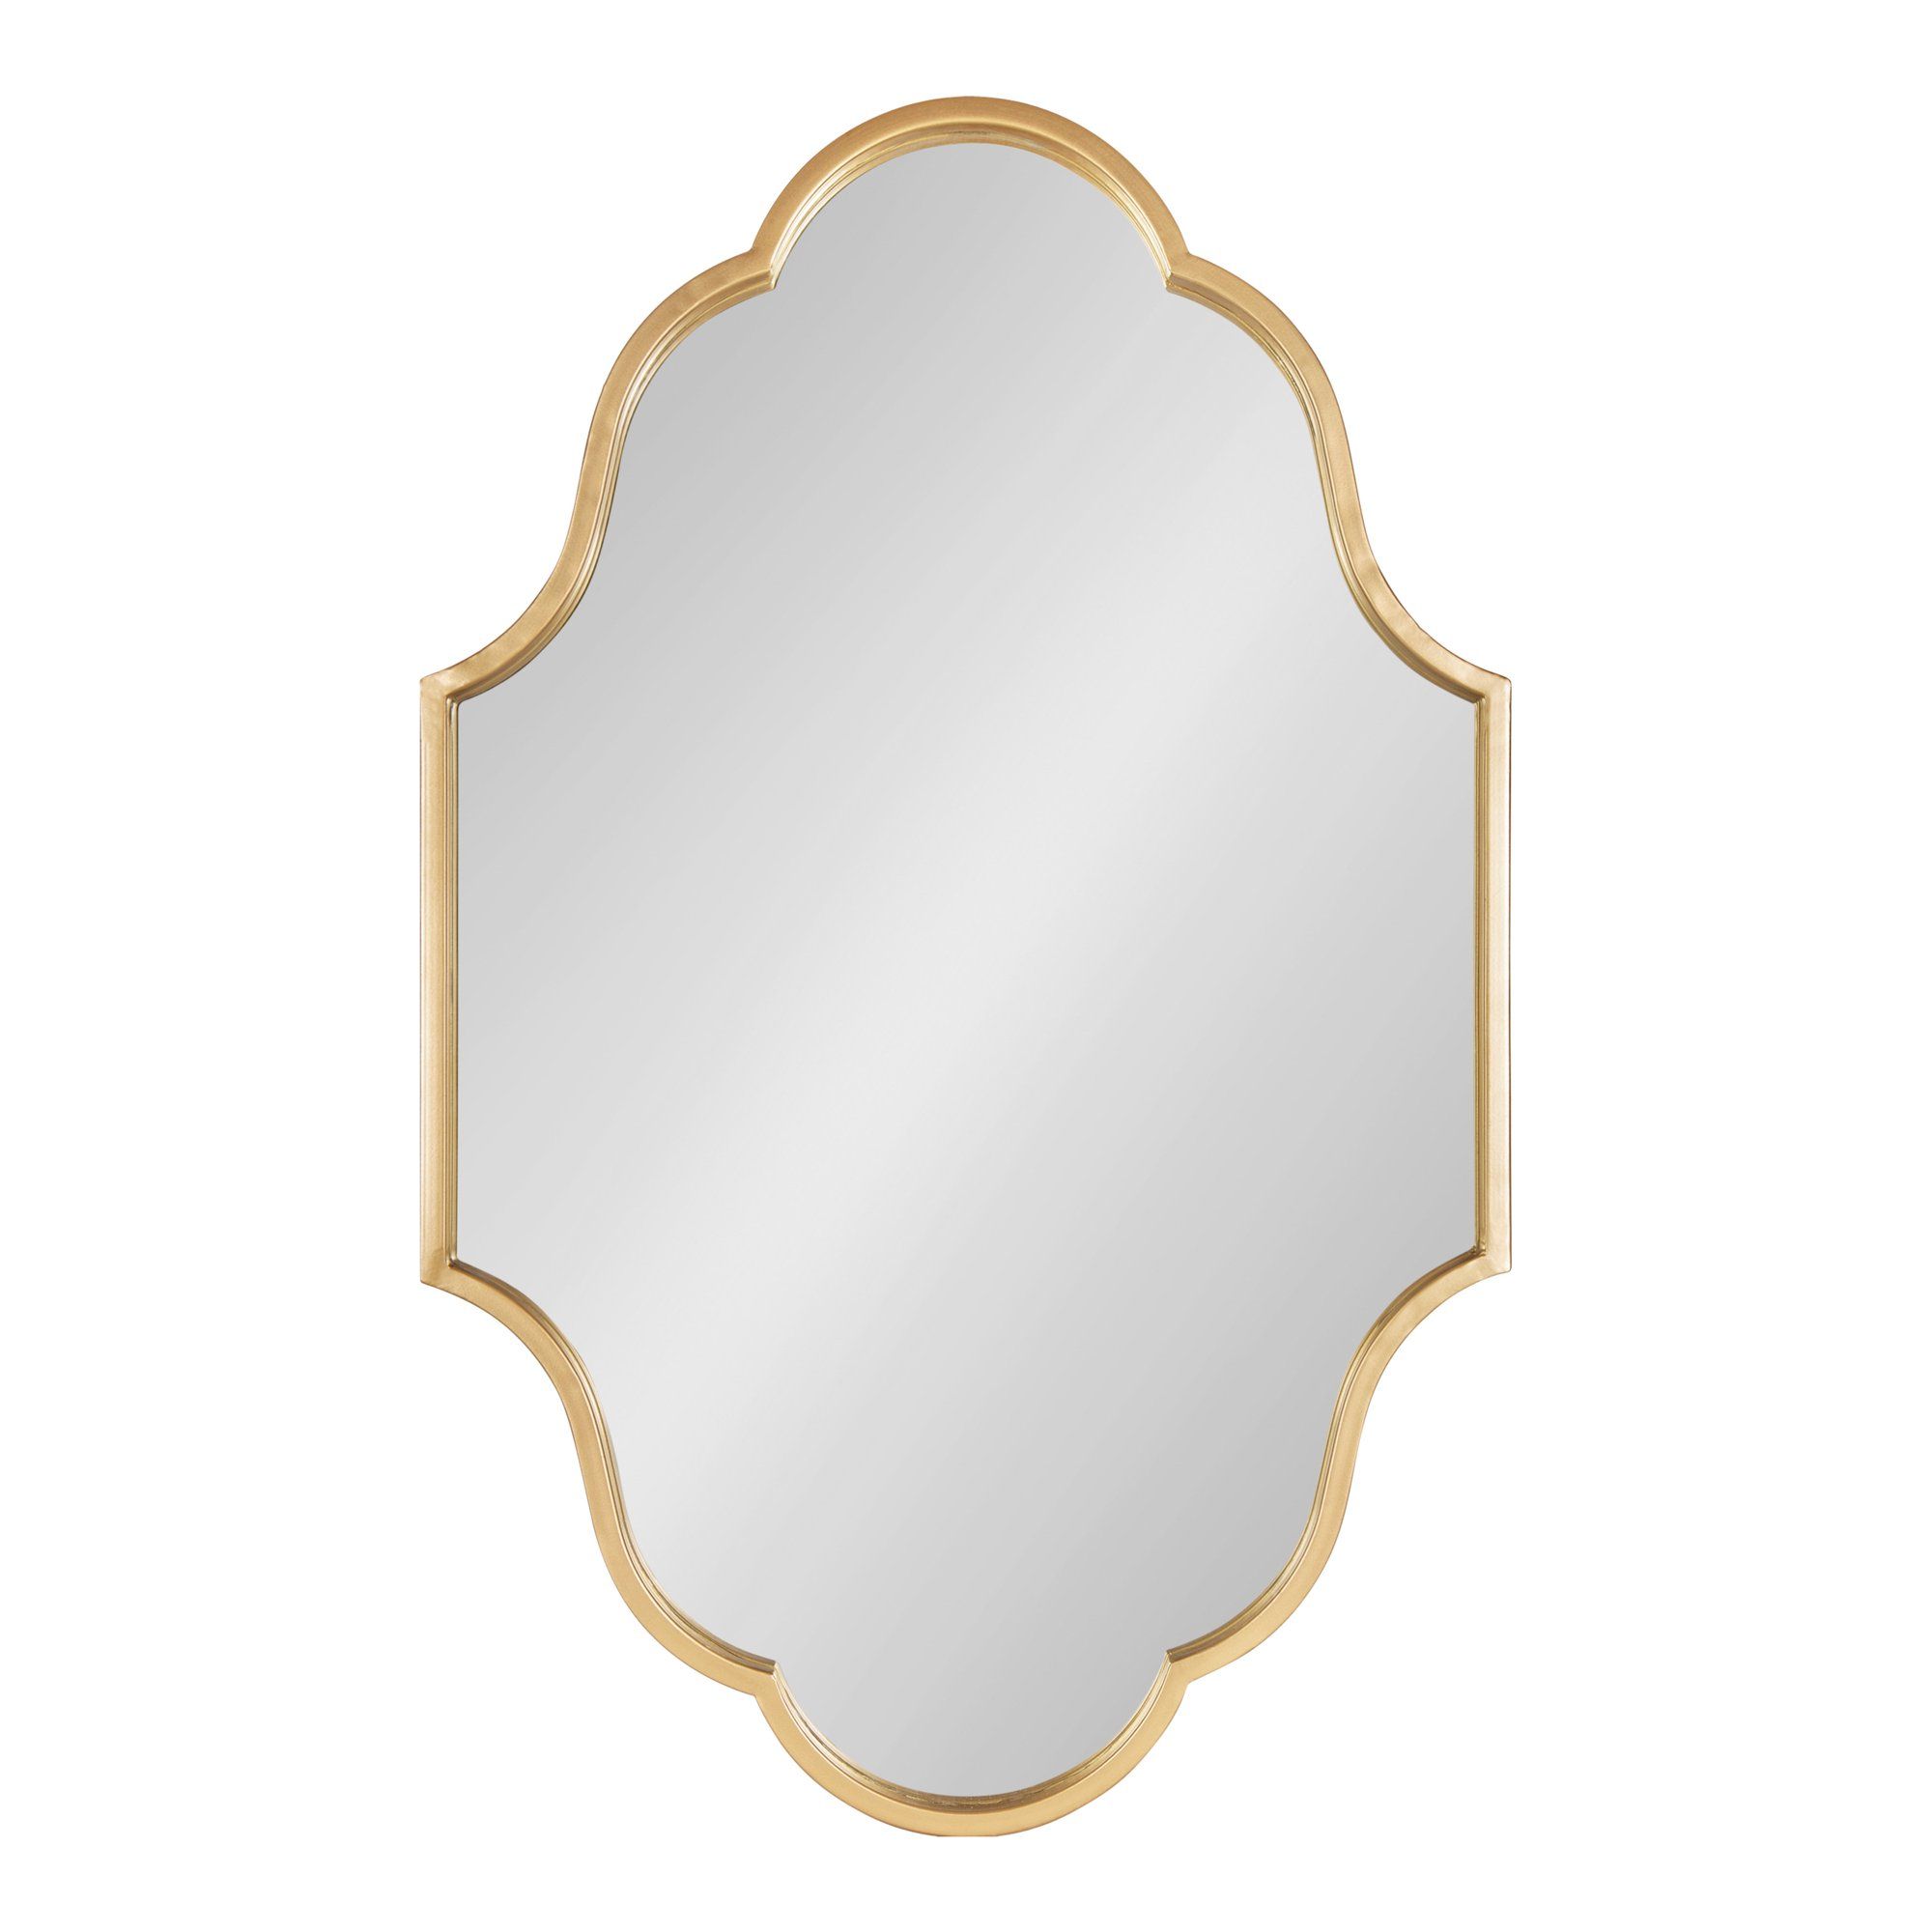 Kate and Laurel Rowla Glam Scalloped Wall Mirror, 23" x 37", Gold, Chic, Sophisticated Accent Mir... | Walmart (US)